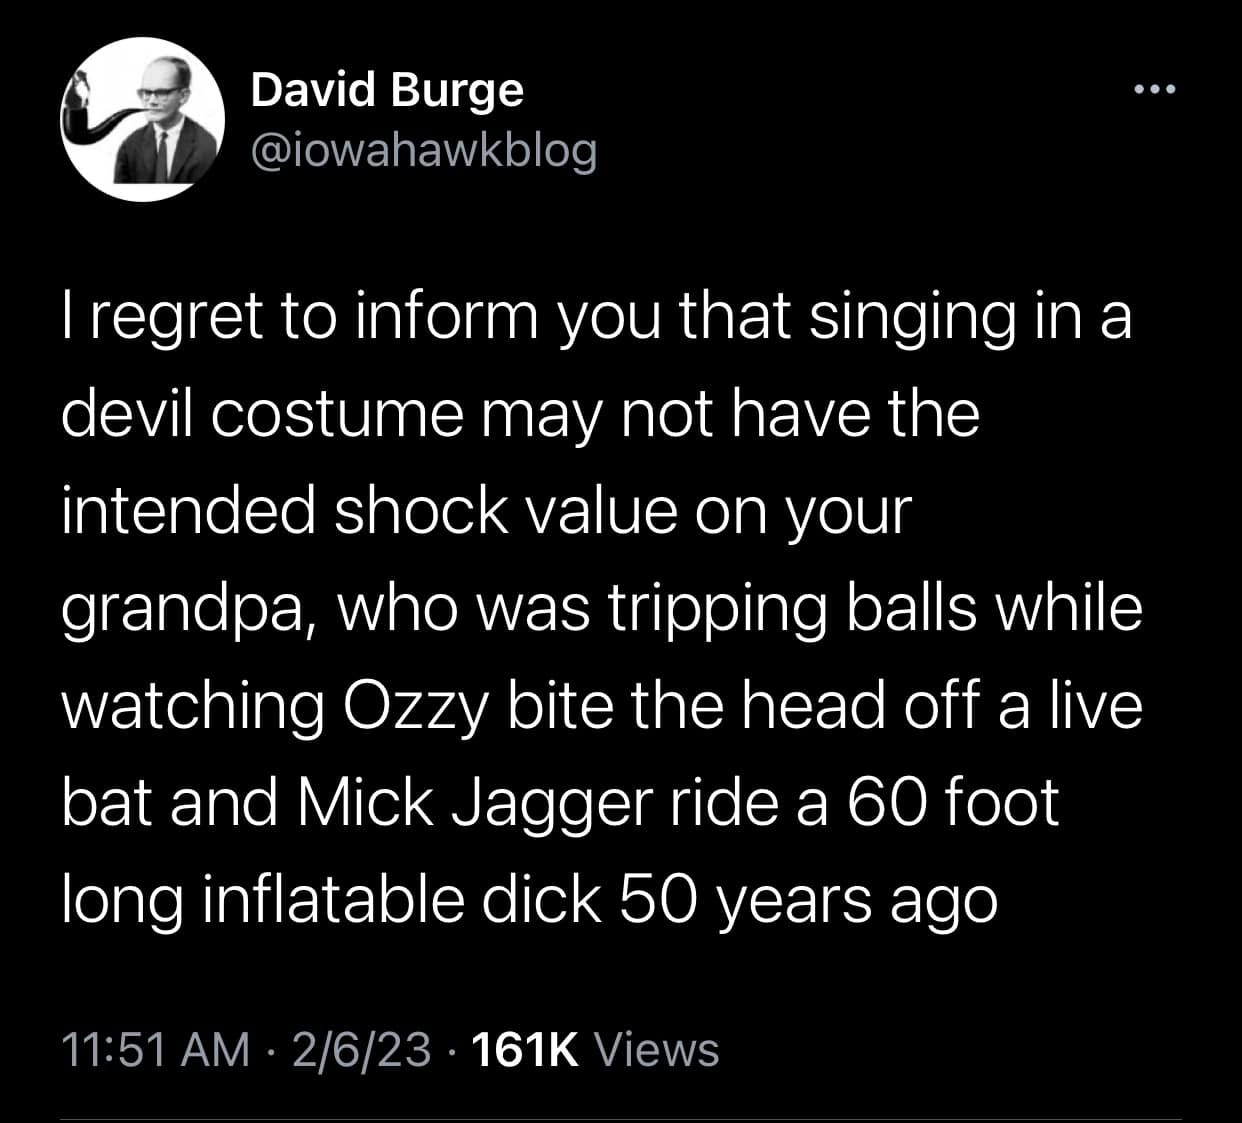 May be a Twitter screenshot of 1 person and text that says 'David Burge @iowahawkblog regret to inform you that singing in a devil costume may not have the intended shock value on your grandpa, who was tripping balls while watching Ozzy bite the head off a live bat and Mick Jagger ride a 60 foot long inflatable dick 50 years ago 11:51 AM 2/6/23 161K Views'